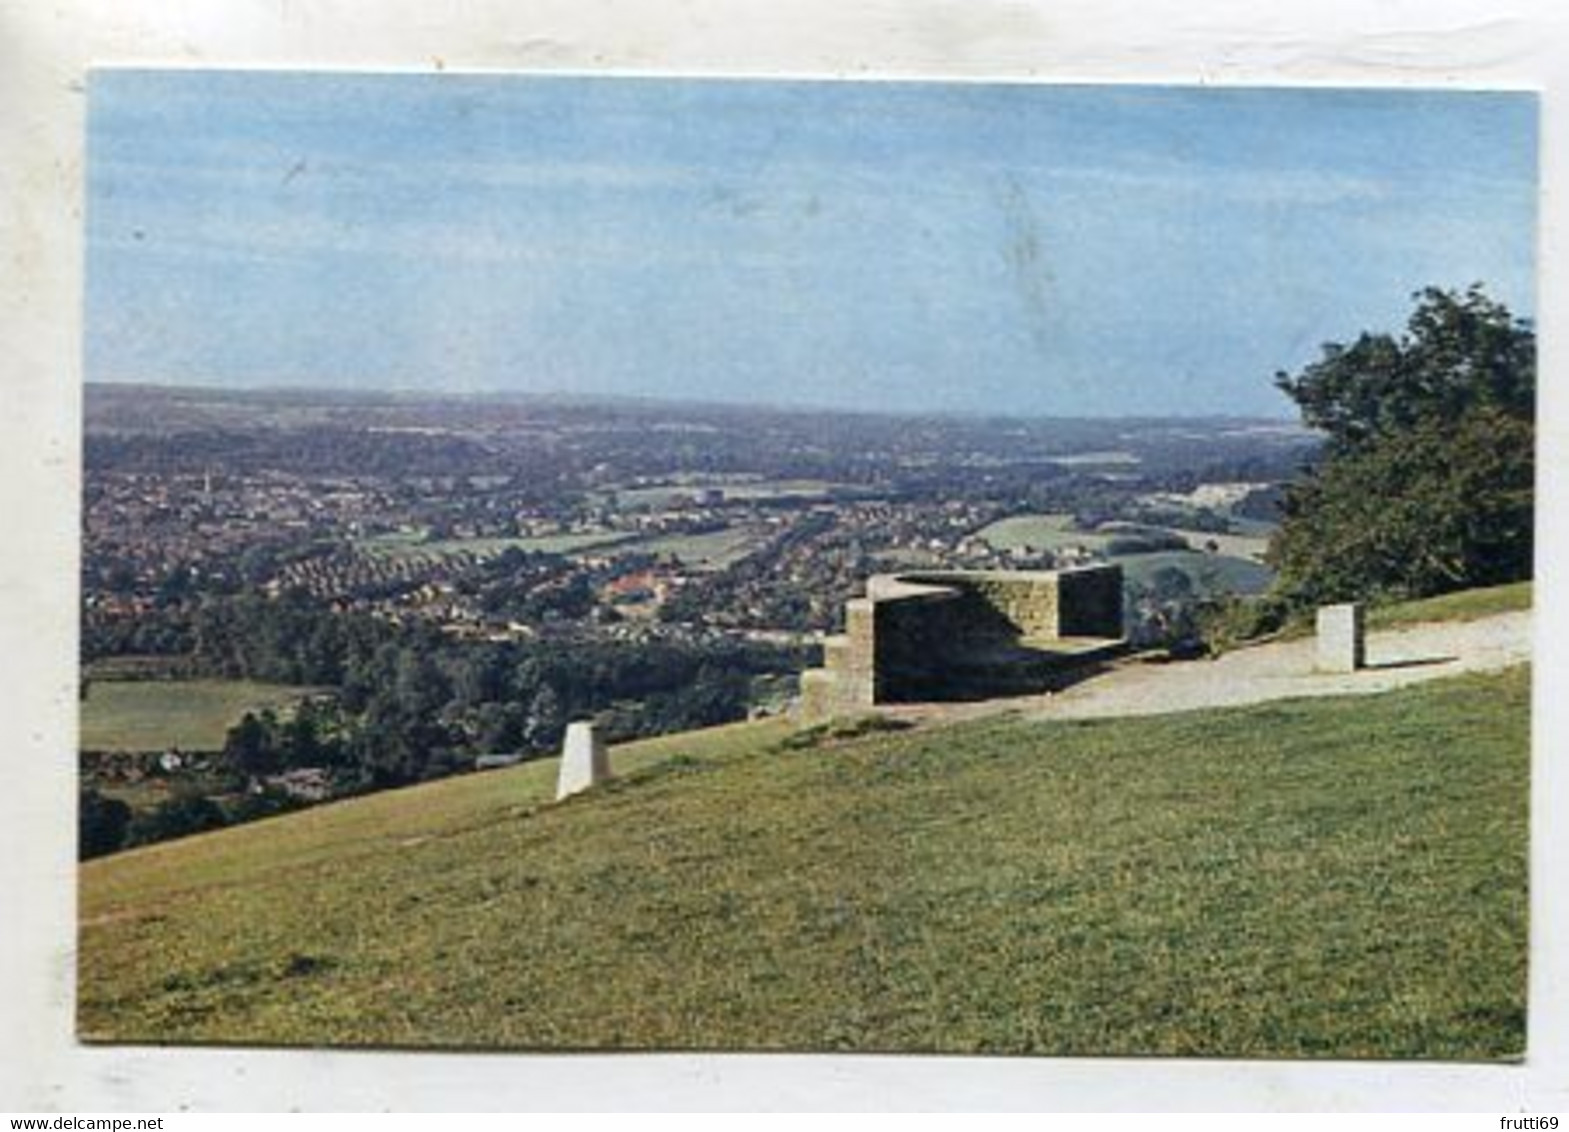 AK 105099 ENGLAND - The Weald From Box Hill - Surrey